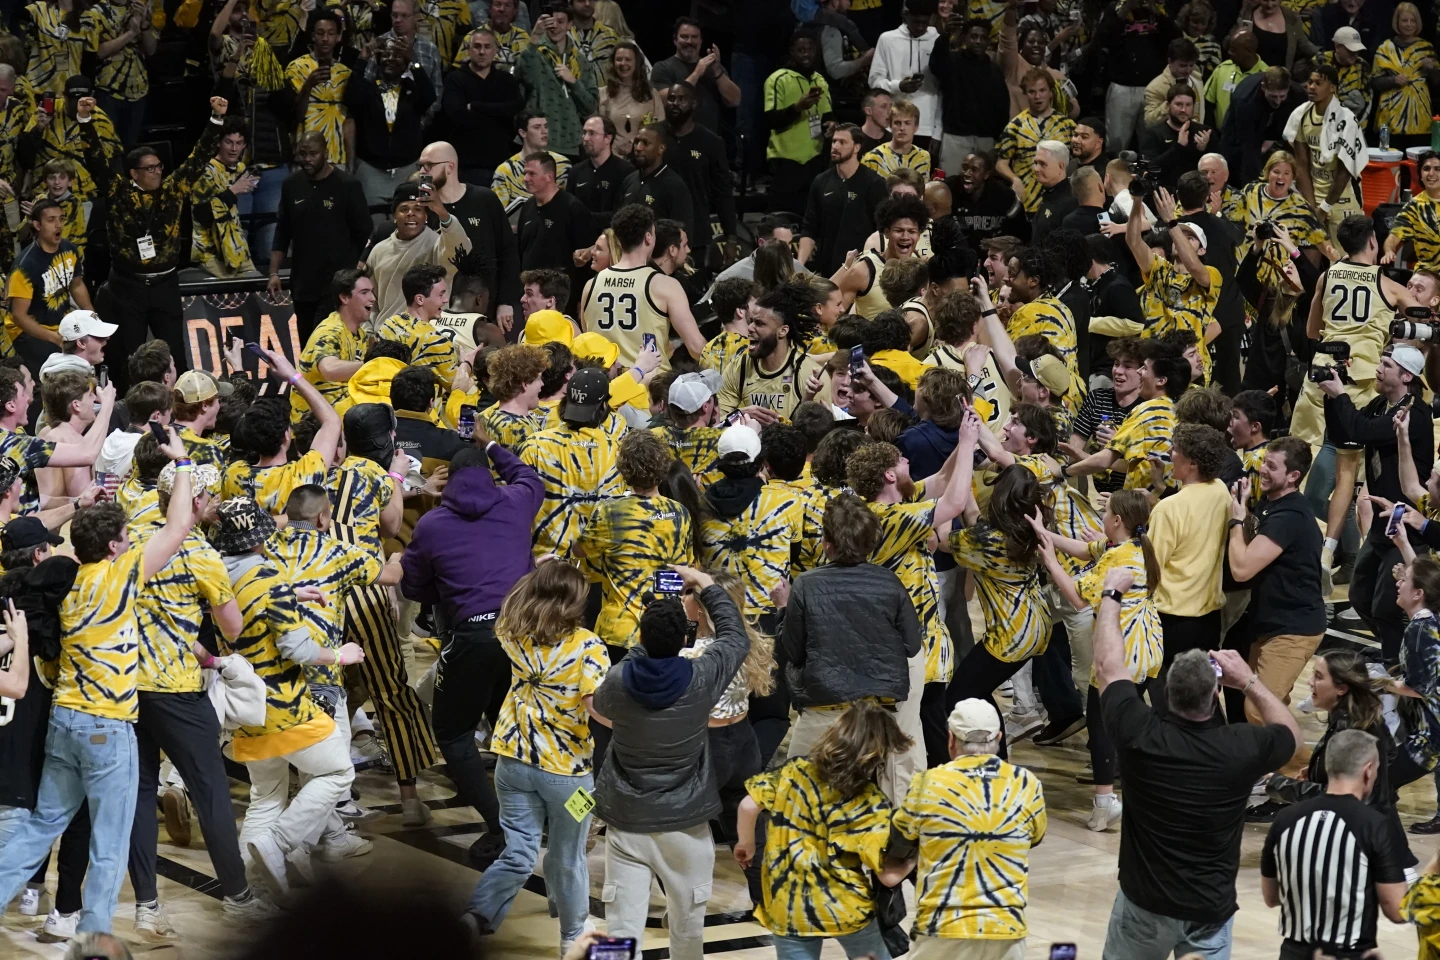 The potential hazards of fans storming the court has run smack into a question: How to stop them?